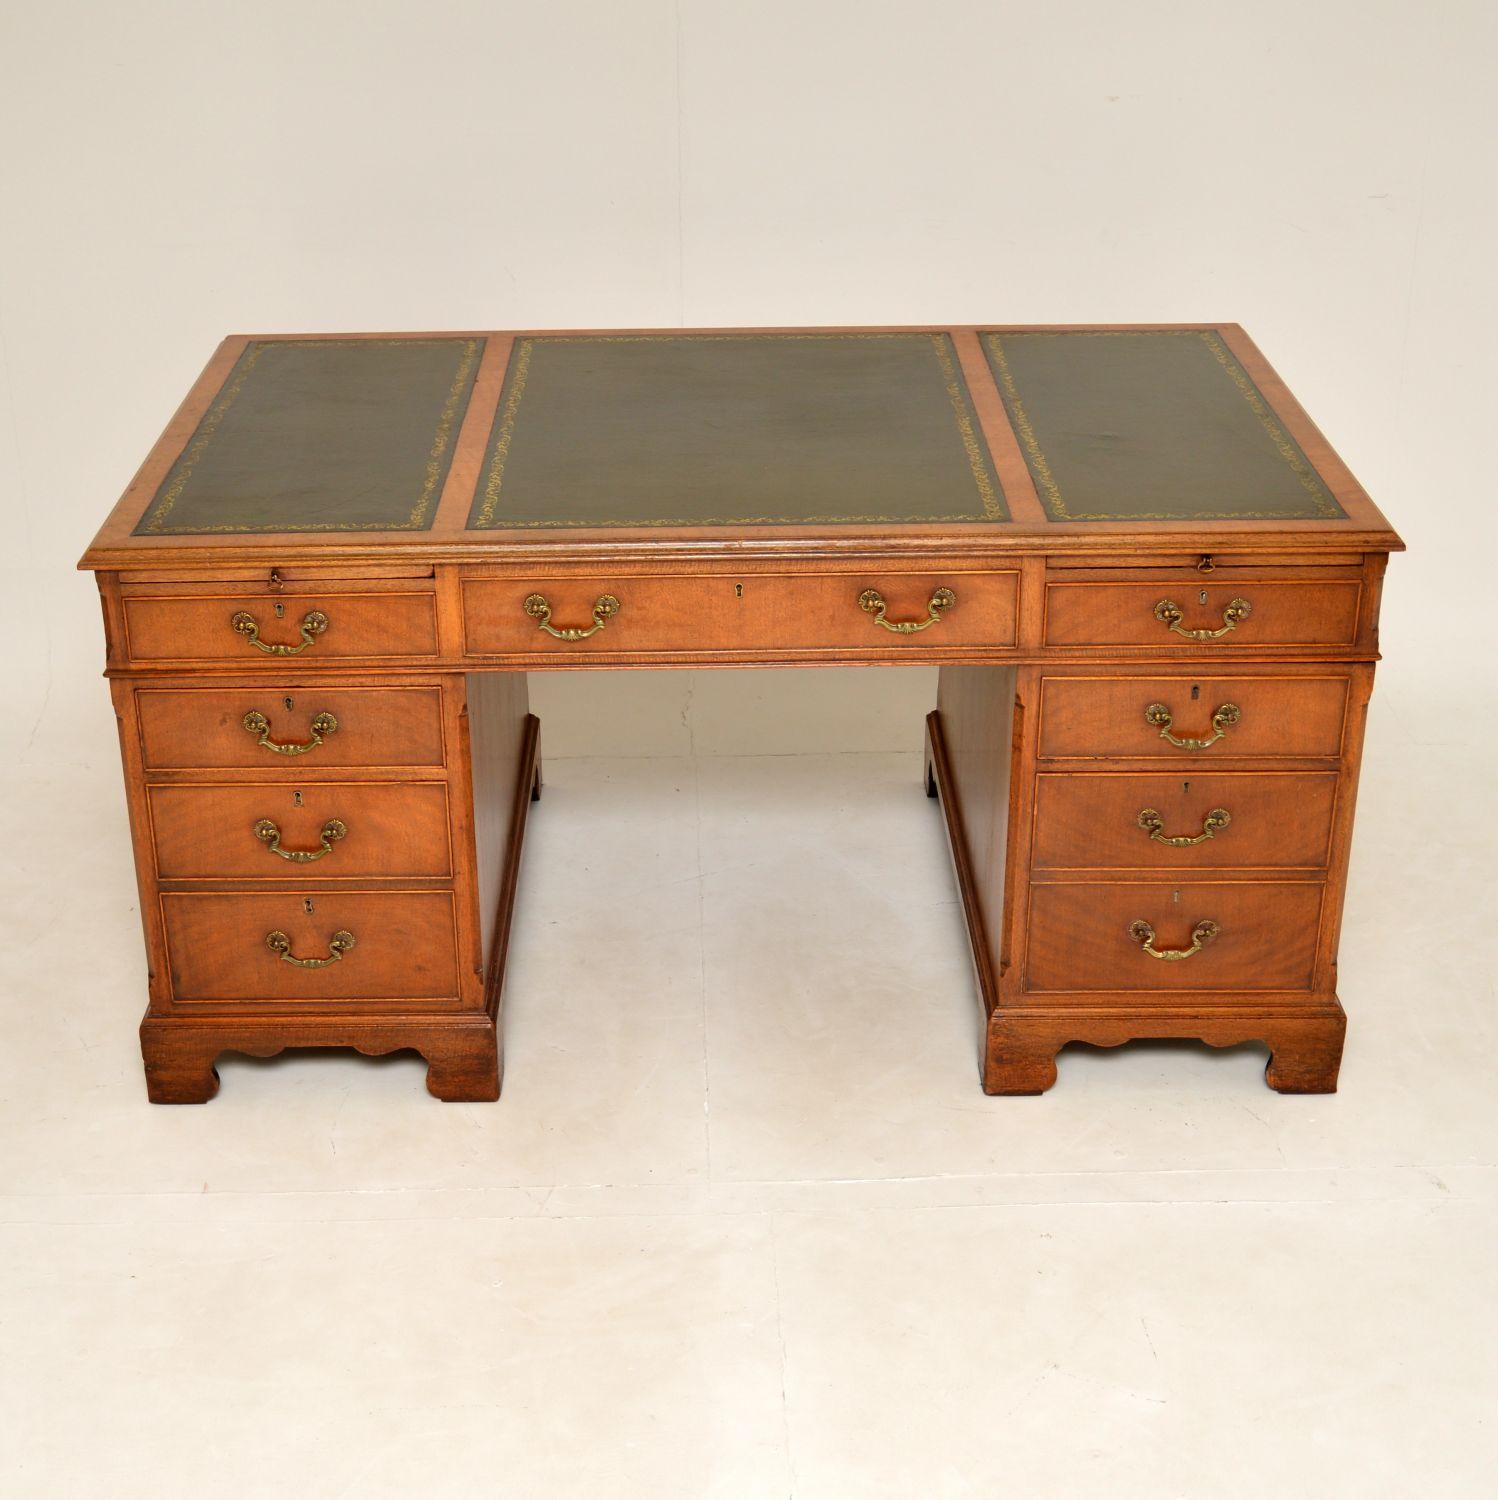 A large and impressive antique pedestal desk in wood This was made by Beresford & Hicks & dates from around the 1930-1950’s.
The quality is amazing, this sits on lovely shaped bracket feet, has canted corners and an original three section tooled